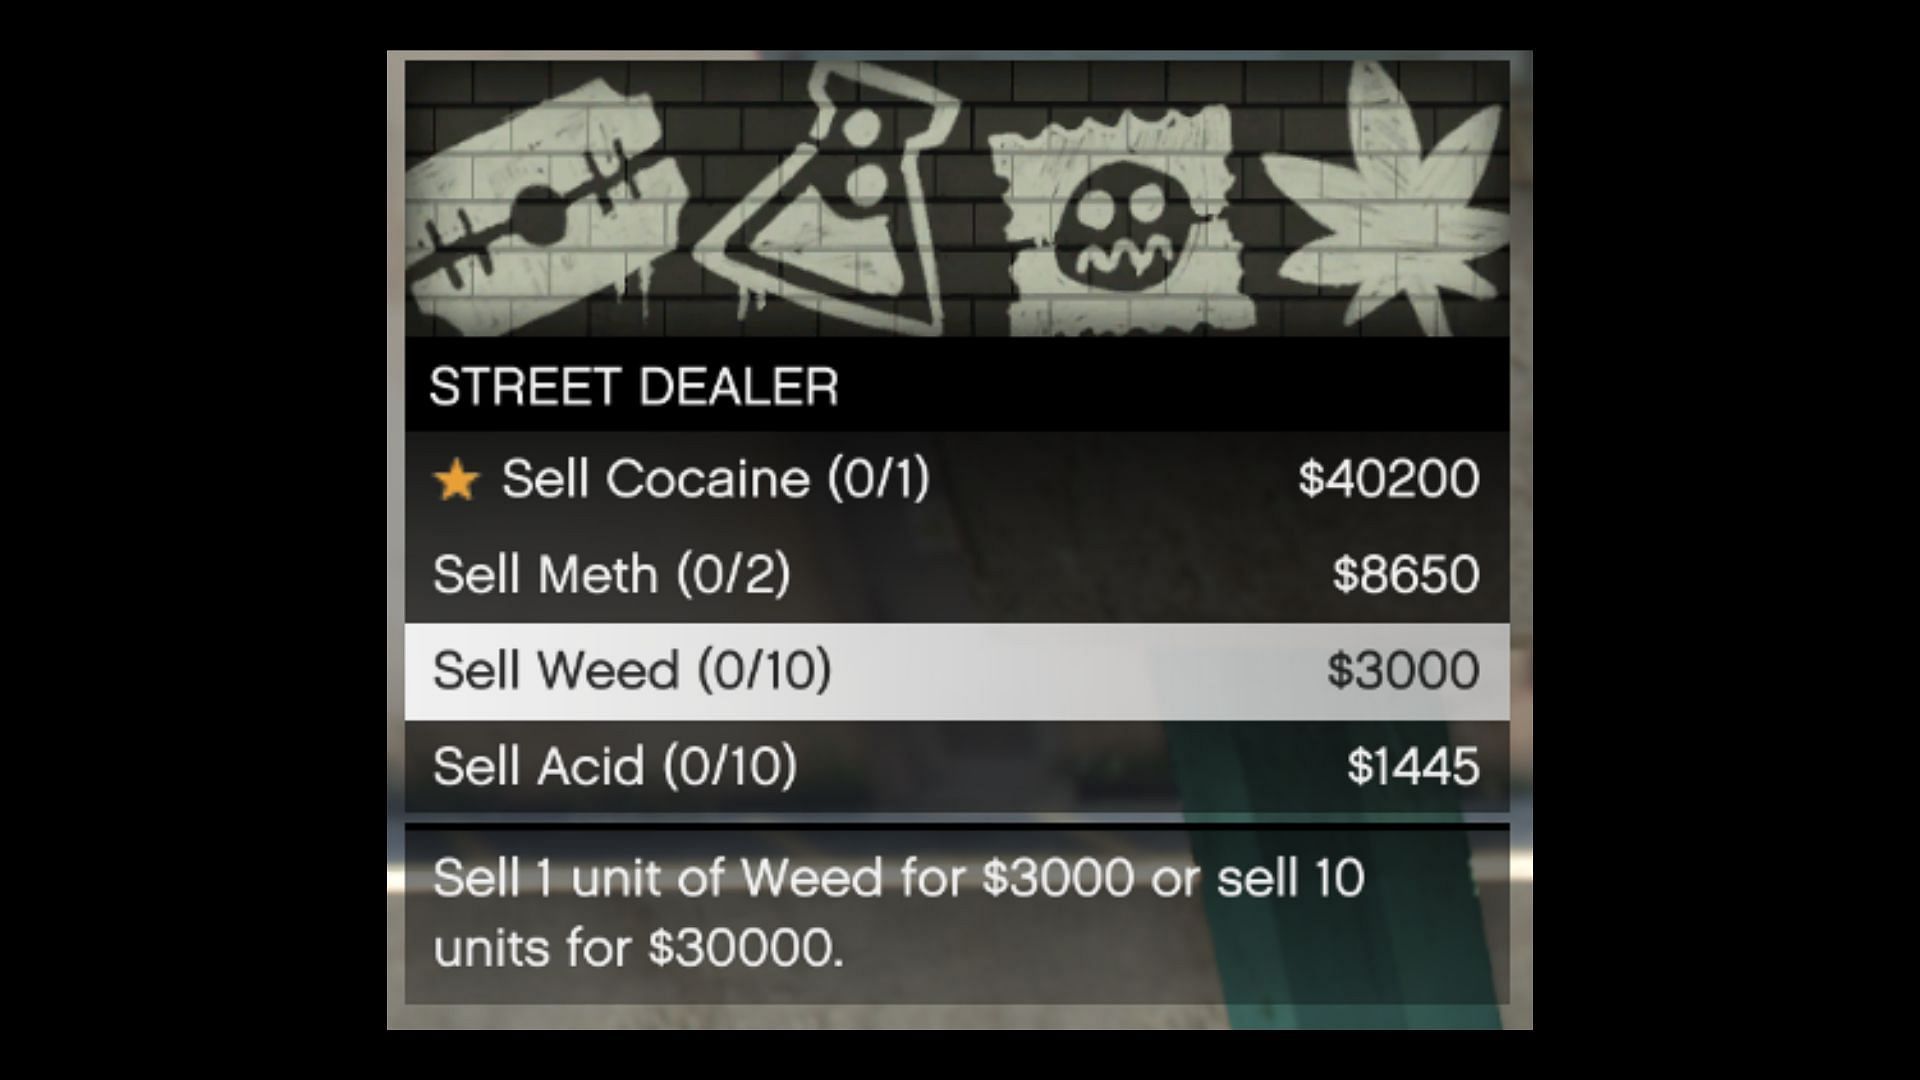 This dealer is paying double for cocaine (Image via X/@TezFunz2)